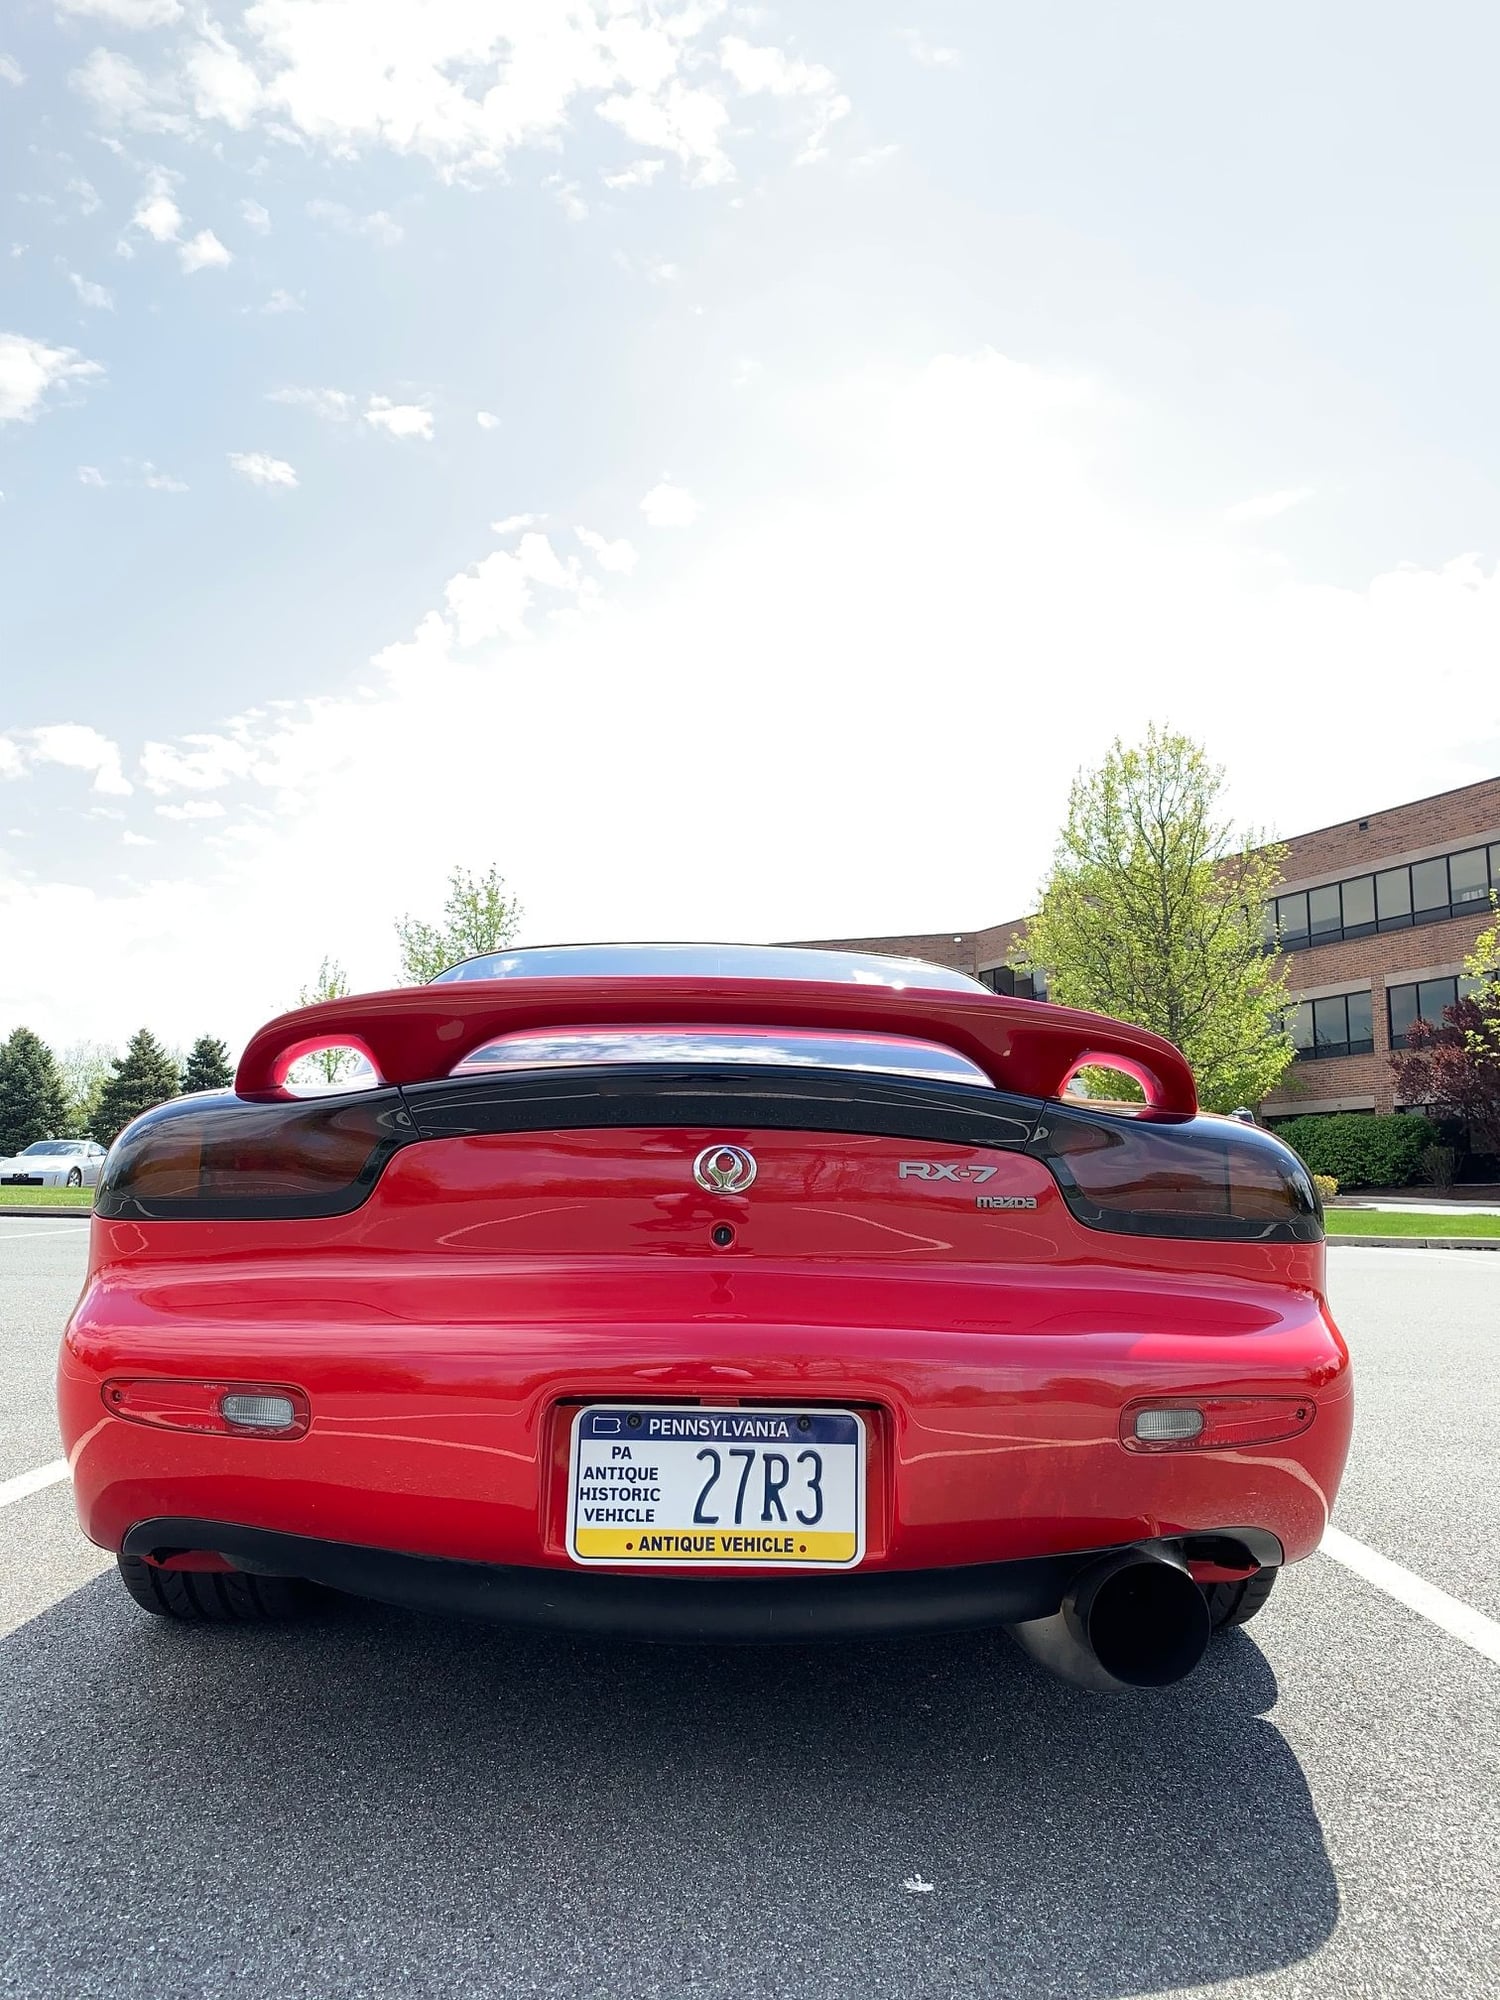 1993 Mazda RX-7 - 1993 Rx-7 LHD 5sp - Perfectly Modded - Base with Leather - Excellent Condition - Used - VIN 1993 Rx-7 VR - 50,828 Miles - Other - 2WD - Manual - Coupe - Red - Allentown, PA 18031, United States